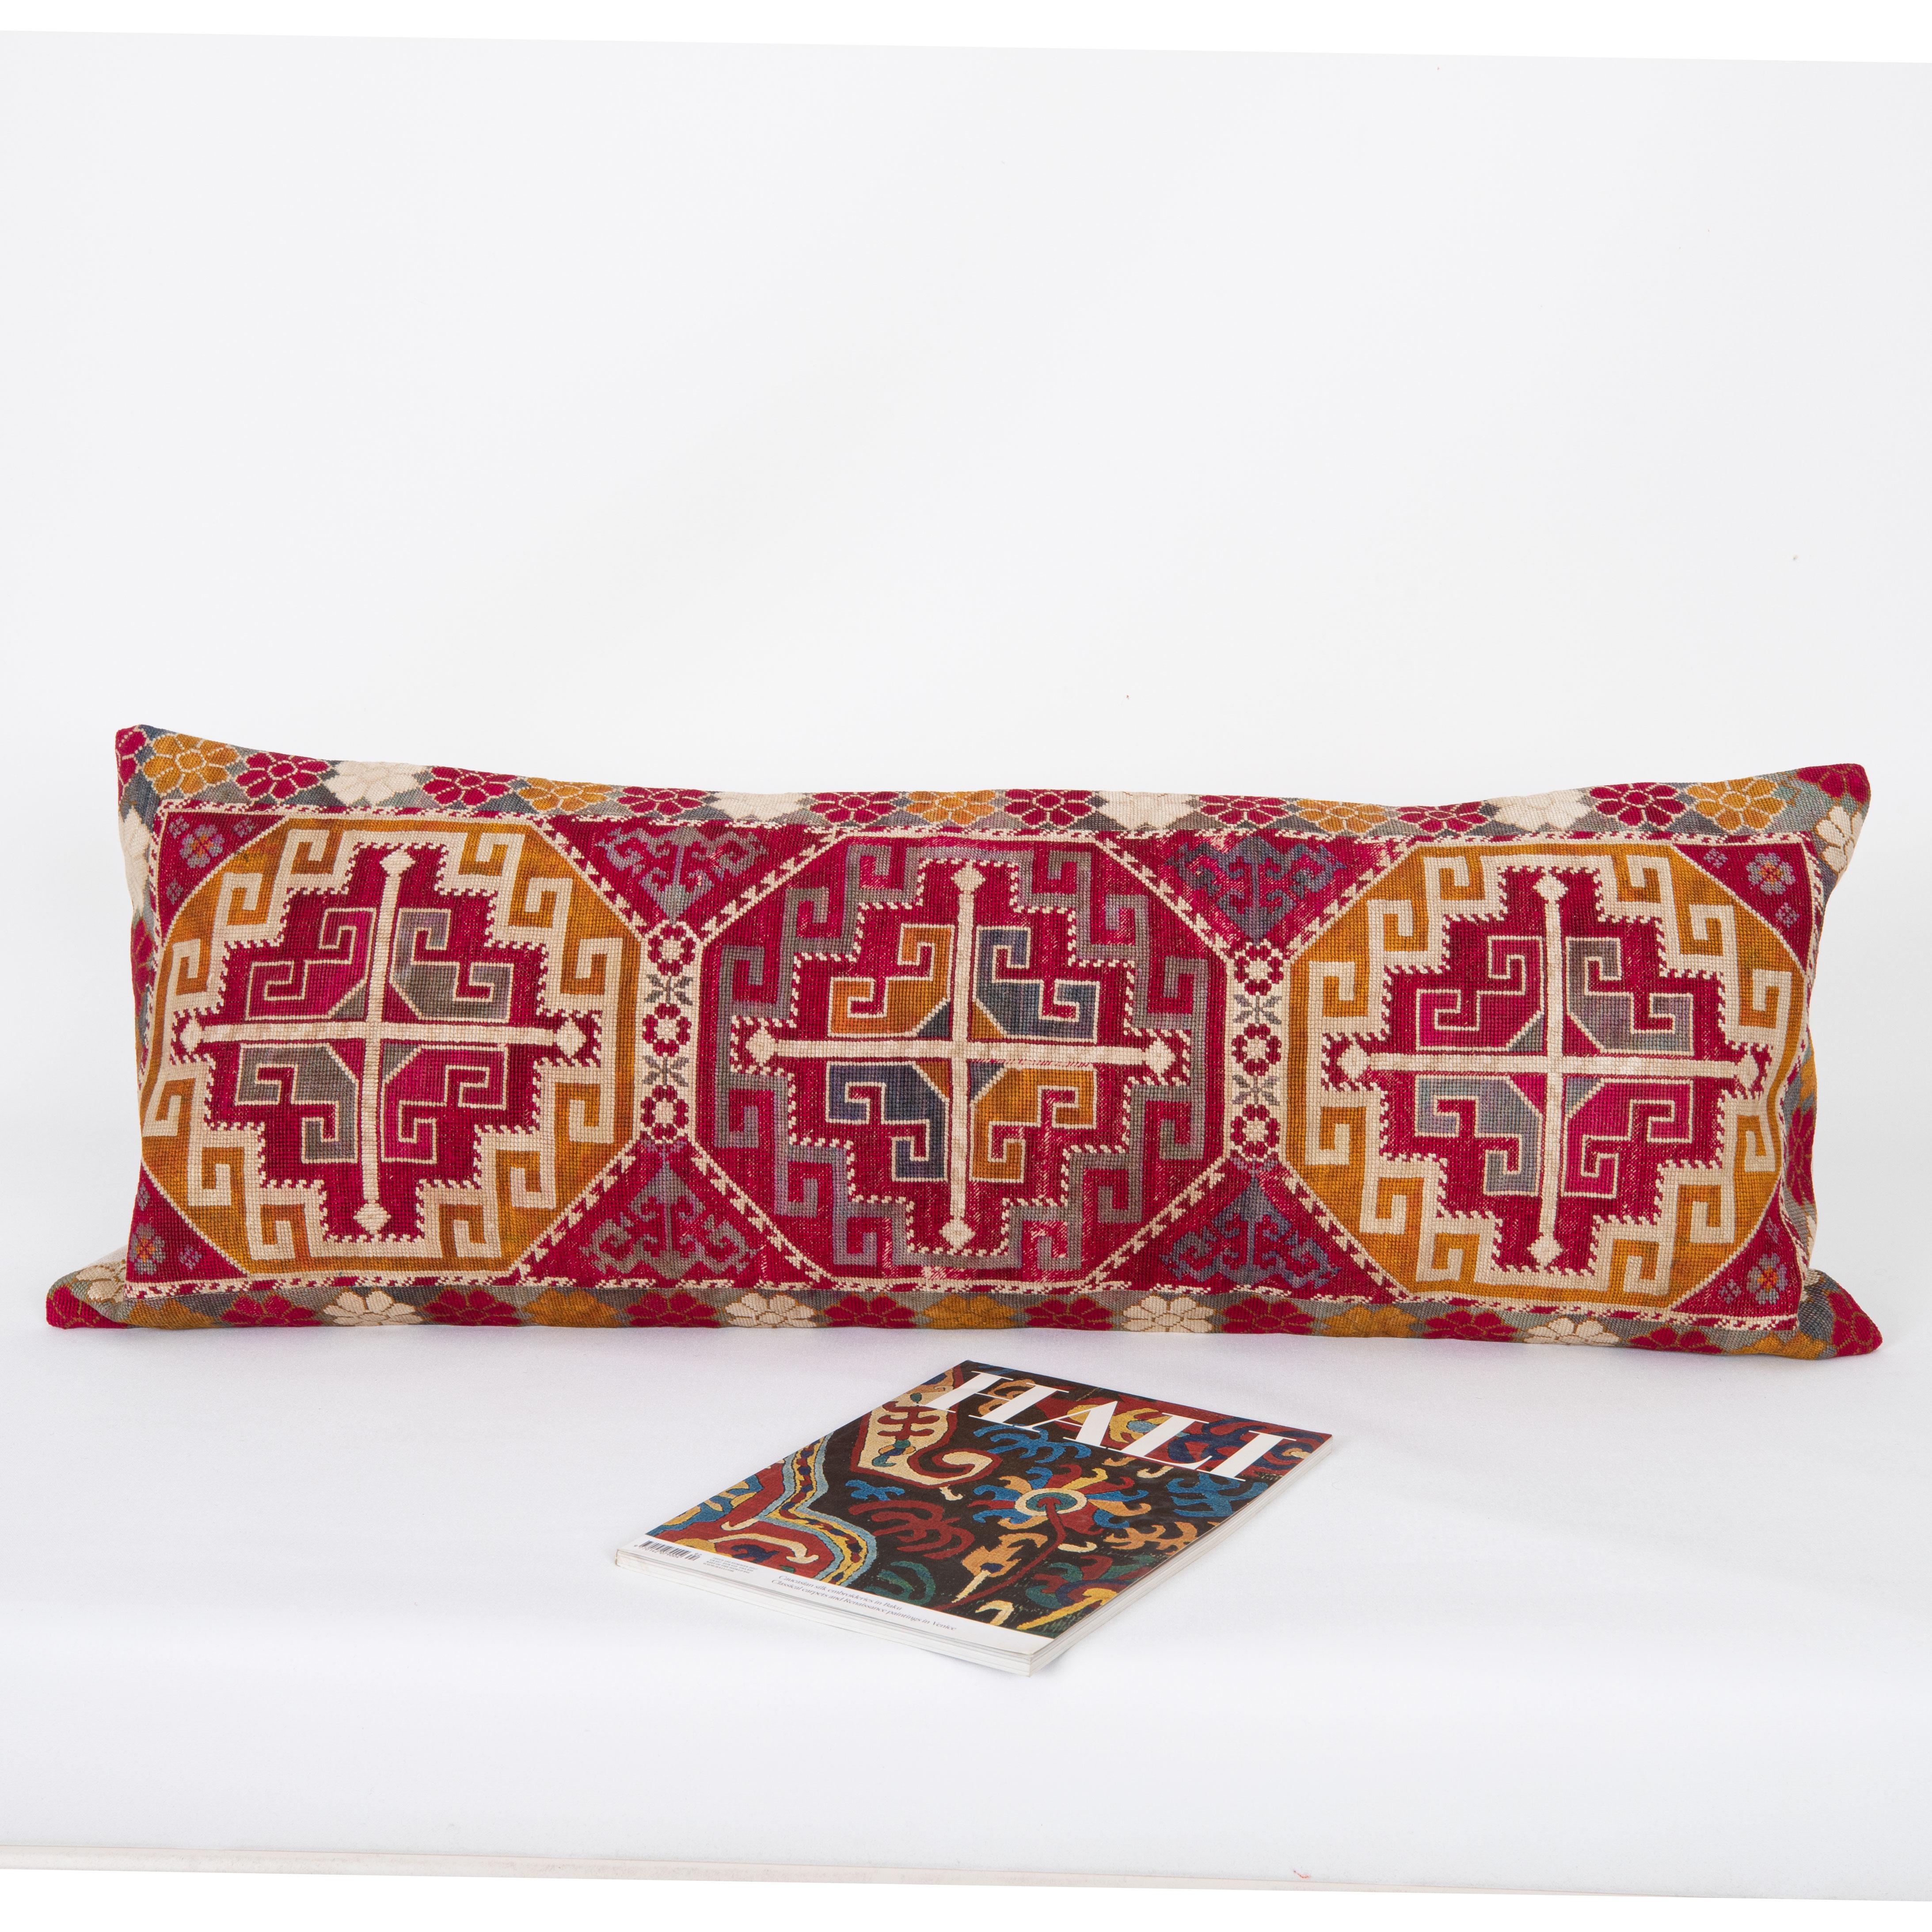 Tribal Pillow Cover, Made from a 1970s/80s silk mafrash ( storage bag ) Panel For Sale